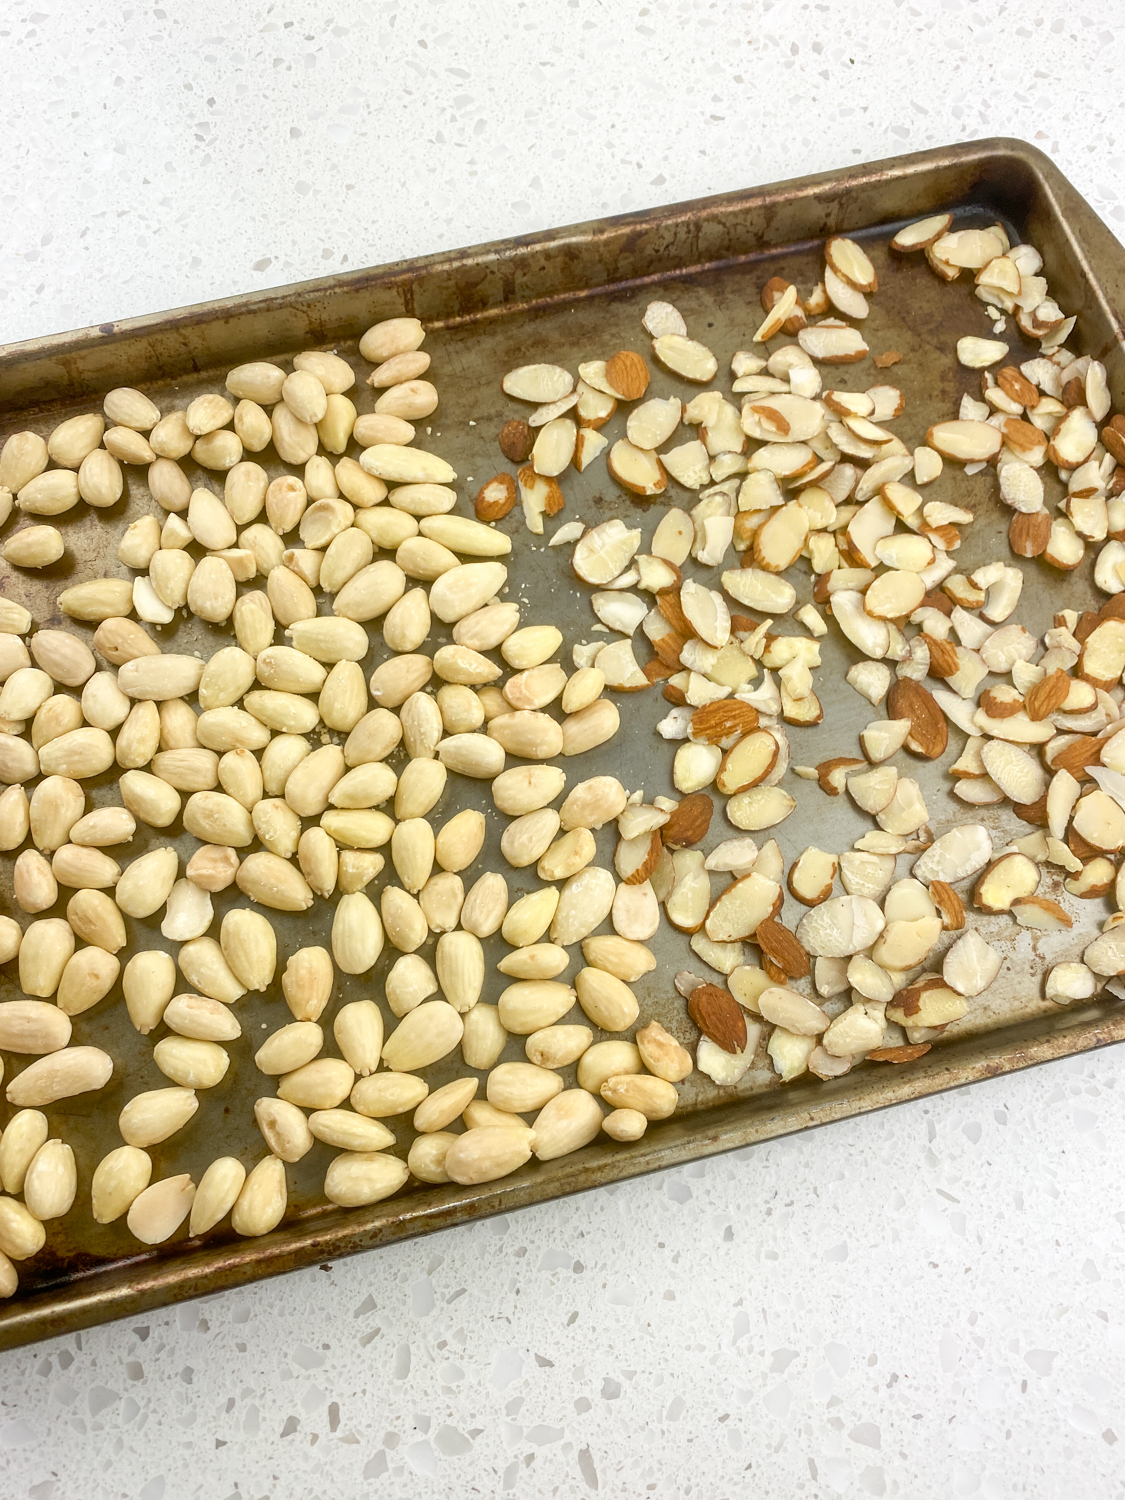 Whole and sliced almonds laid out on a baking sheet.